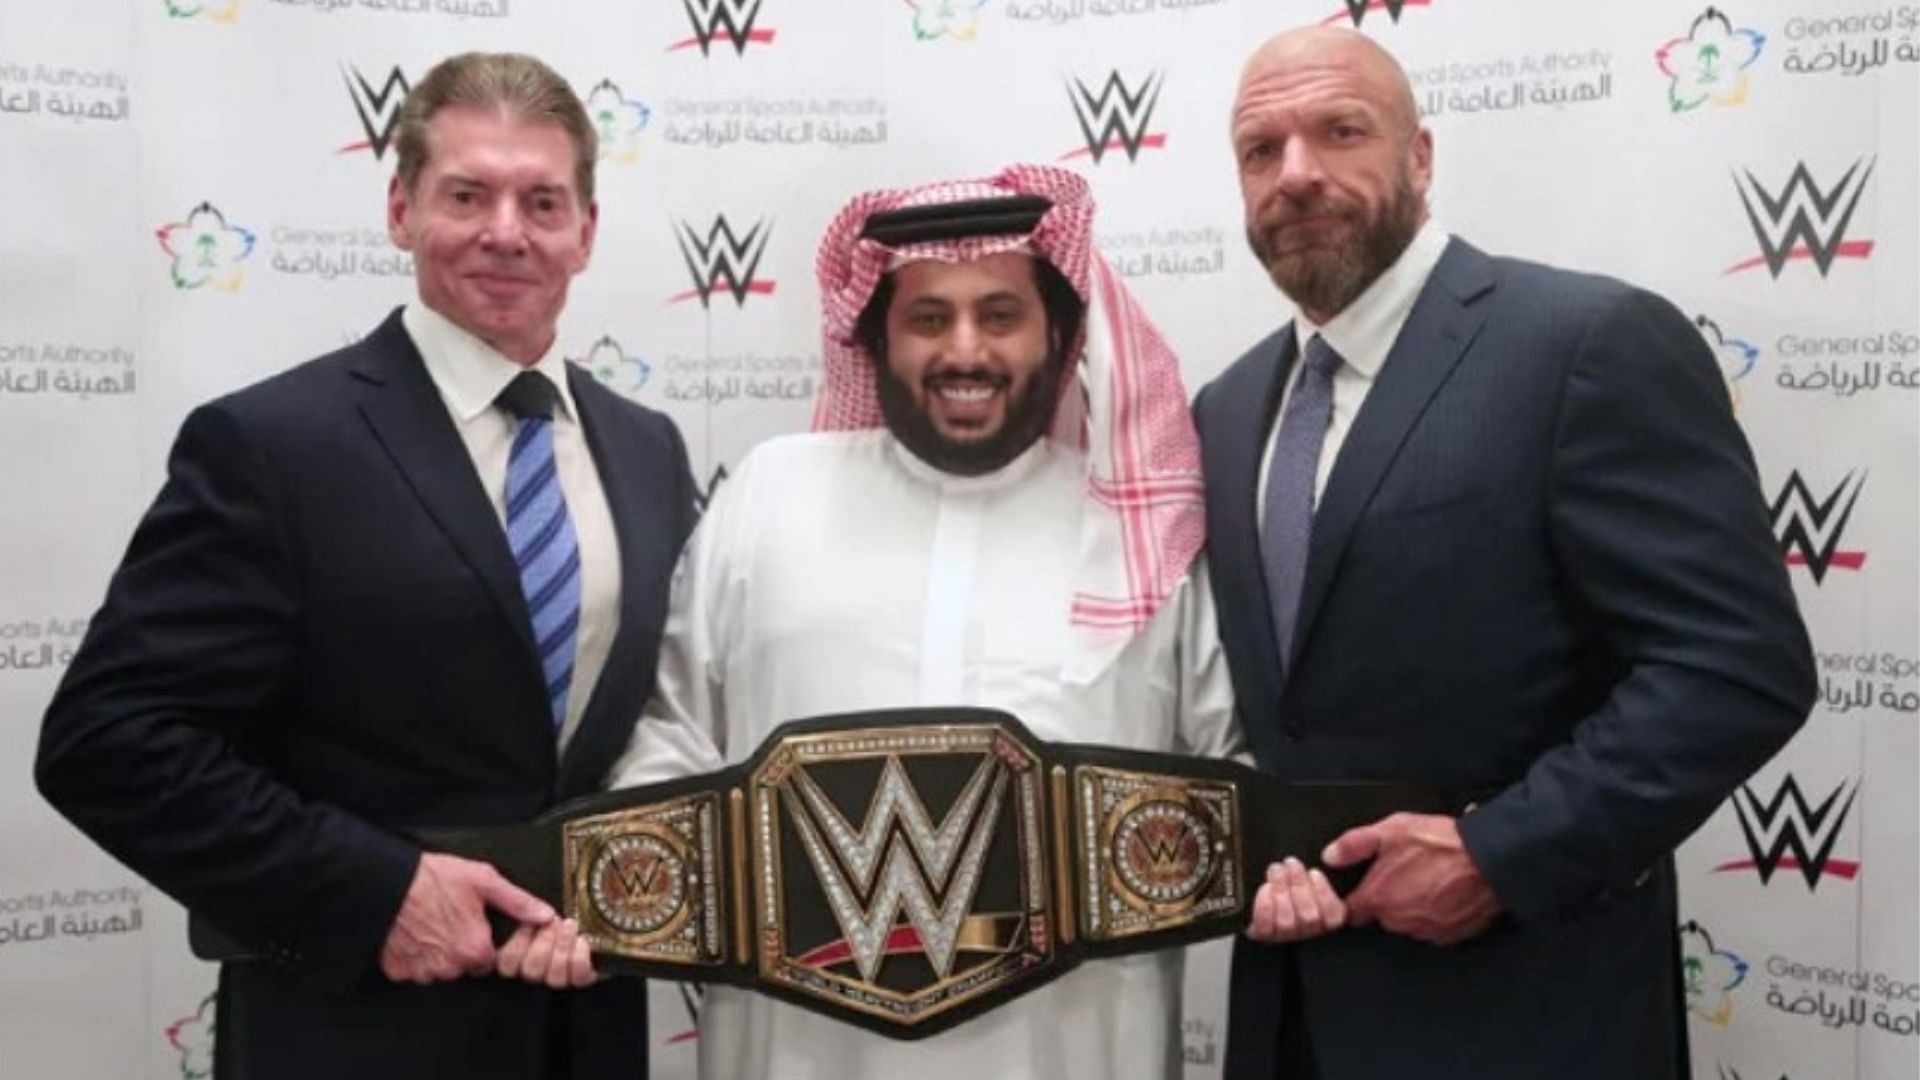 WWE massively benefited with a multi-million dollar deal